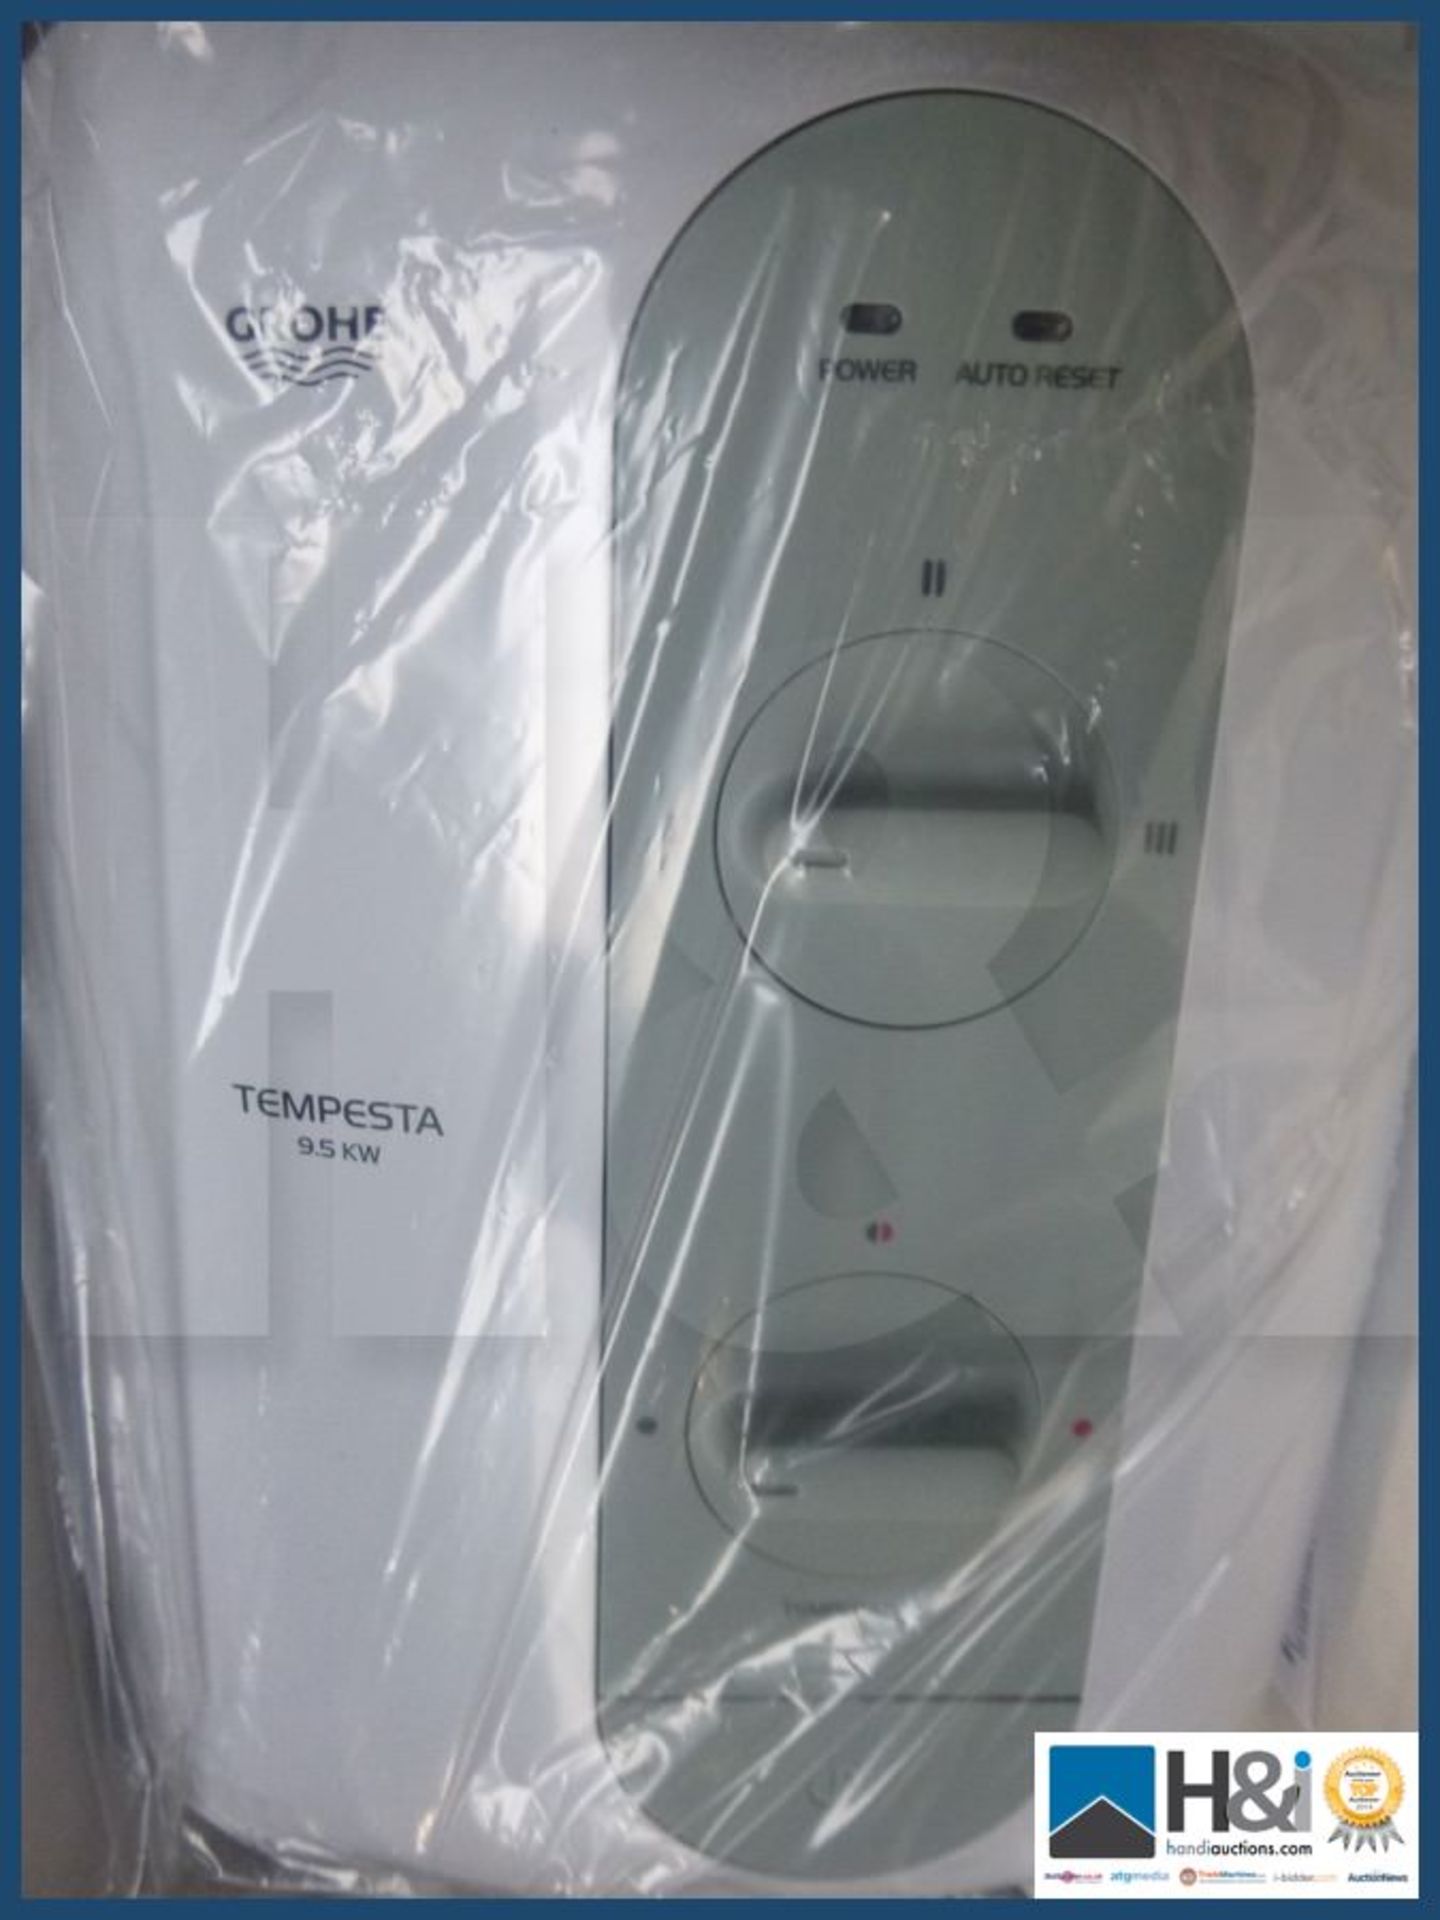 Grohe tempesta 100 (9.5kw) electric shower with shower rail kit .RRP 395 GBP. - Image 3 of 5